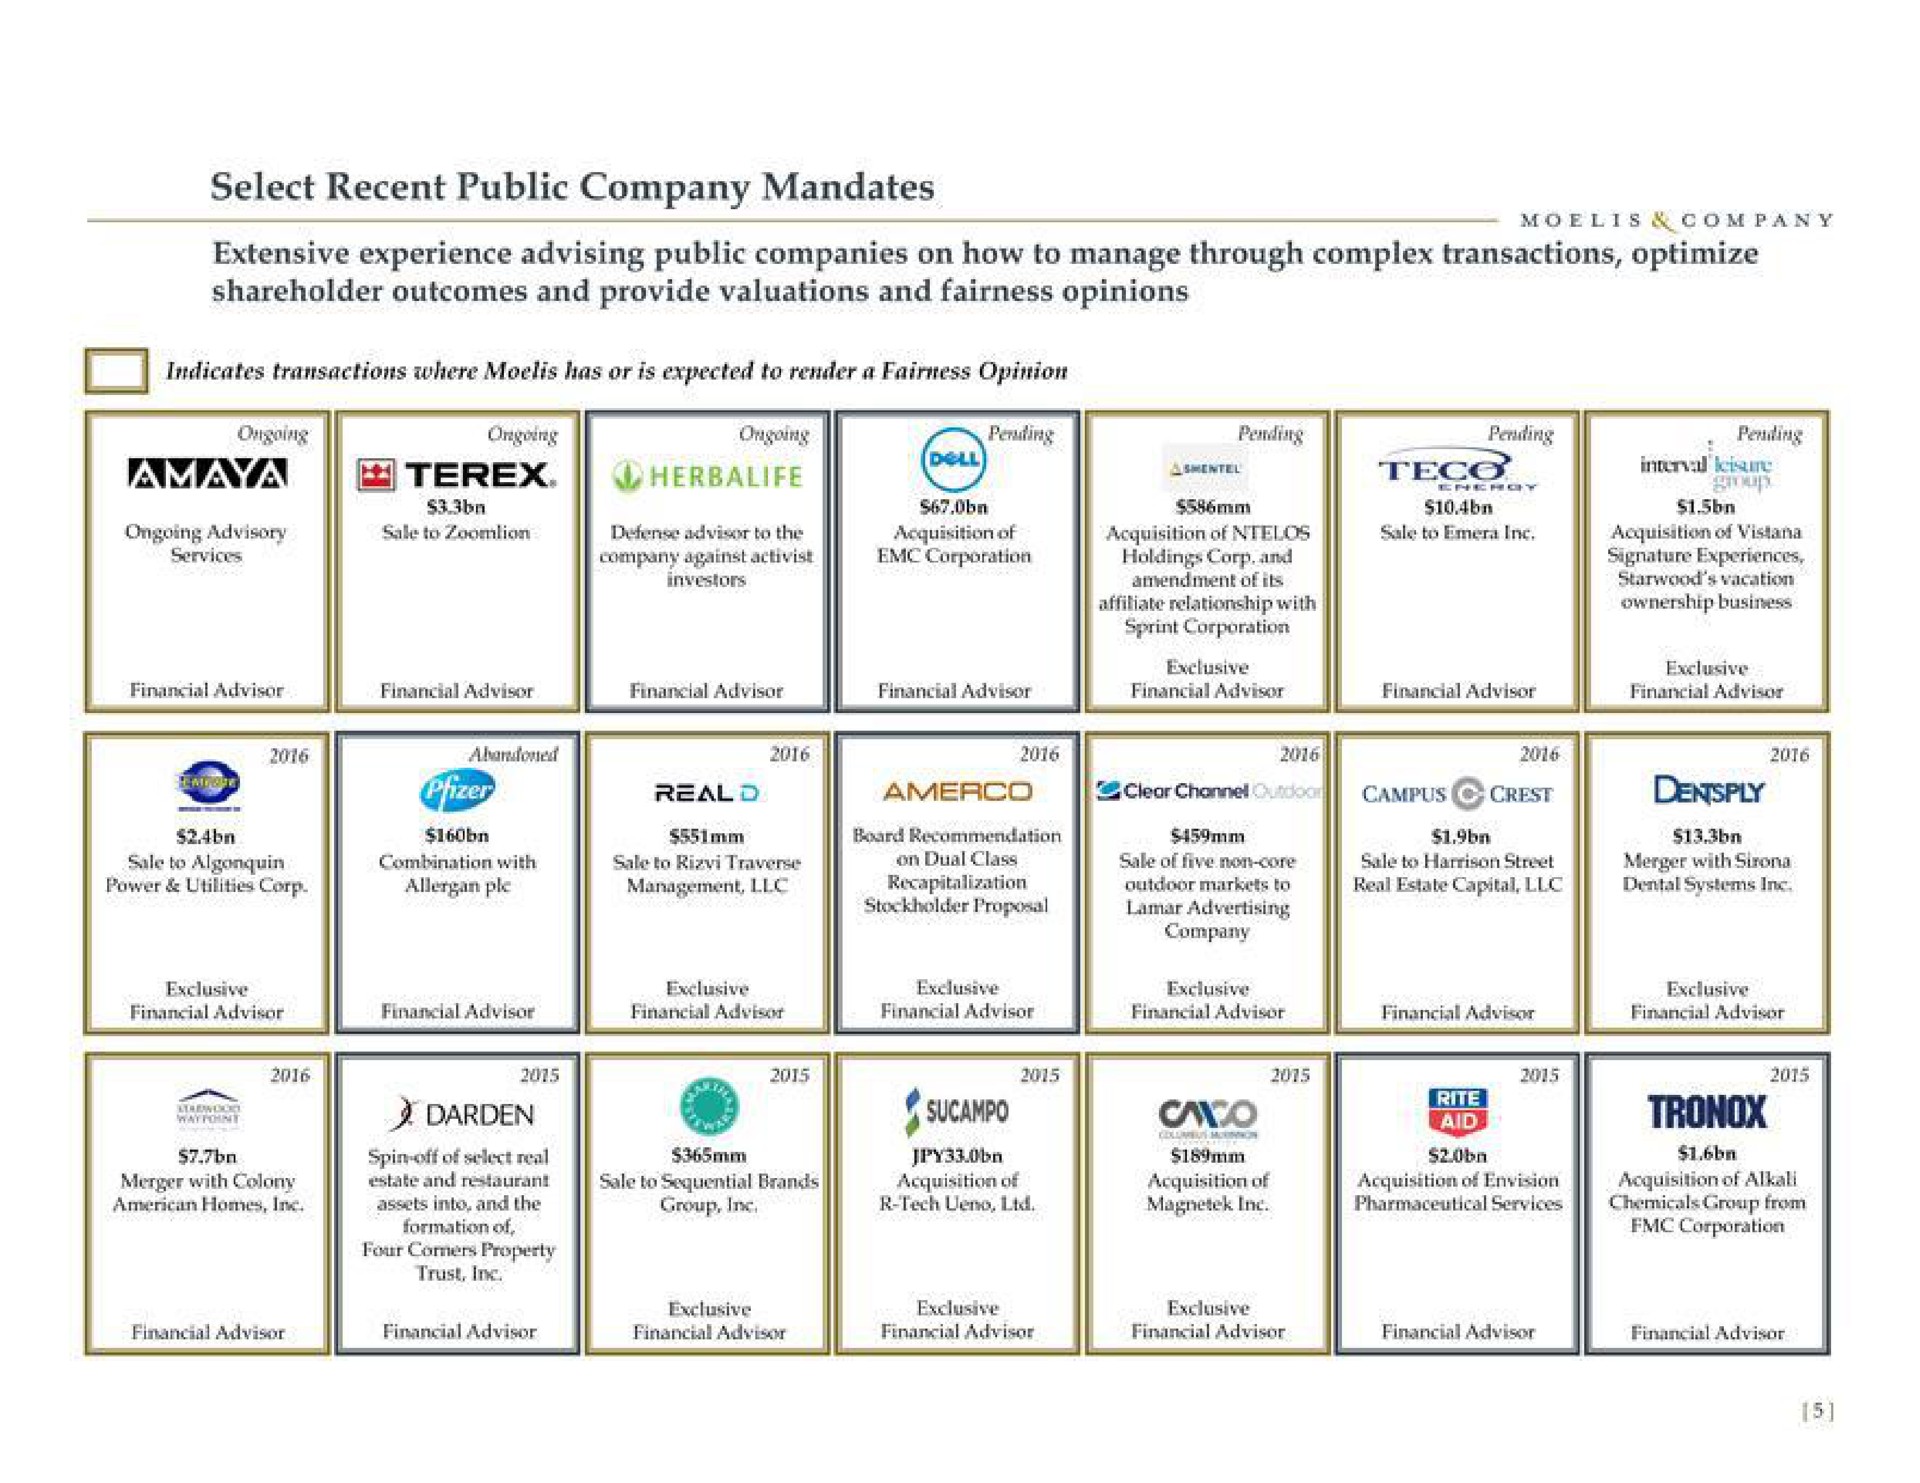 select recent public company mandates extensive experience advising public companies on how to manage through complex transactions optimize be campus crest | Moelis & Company